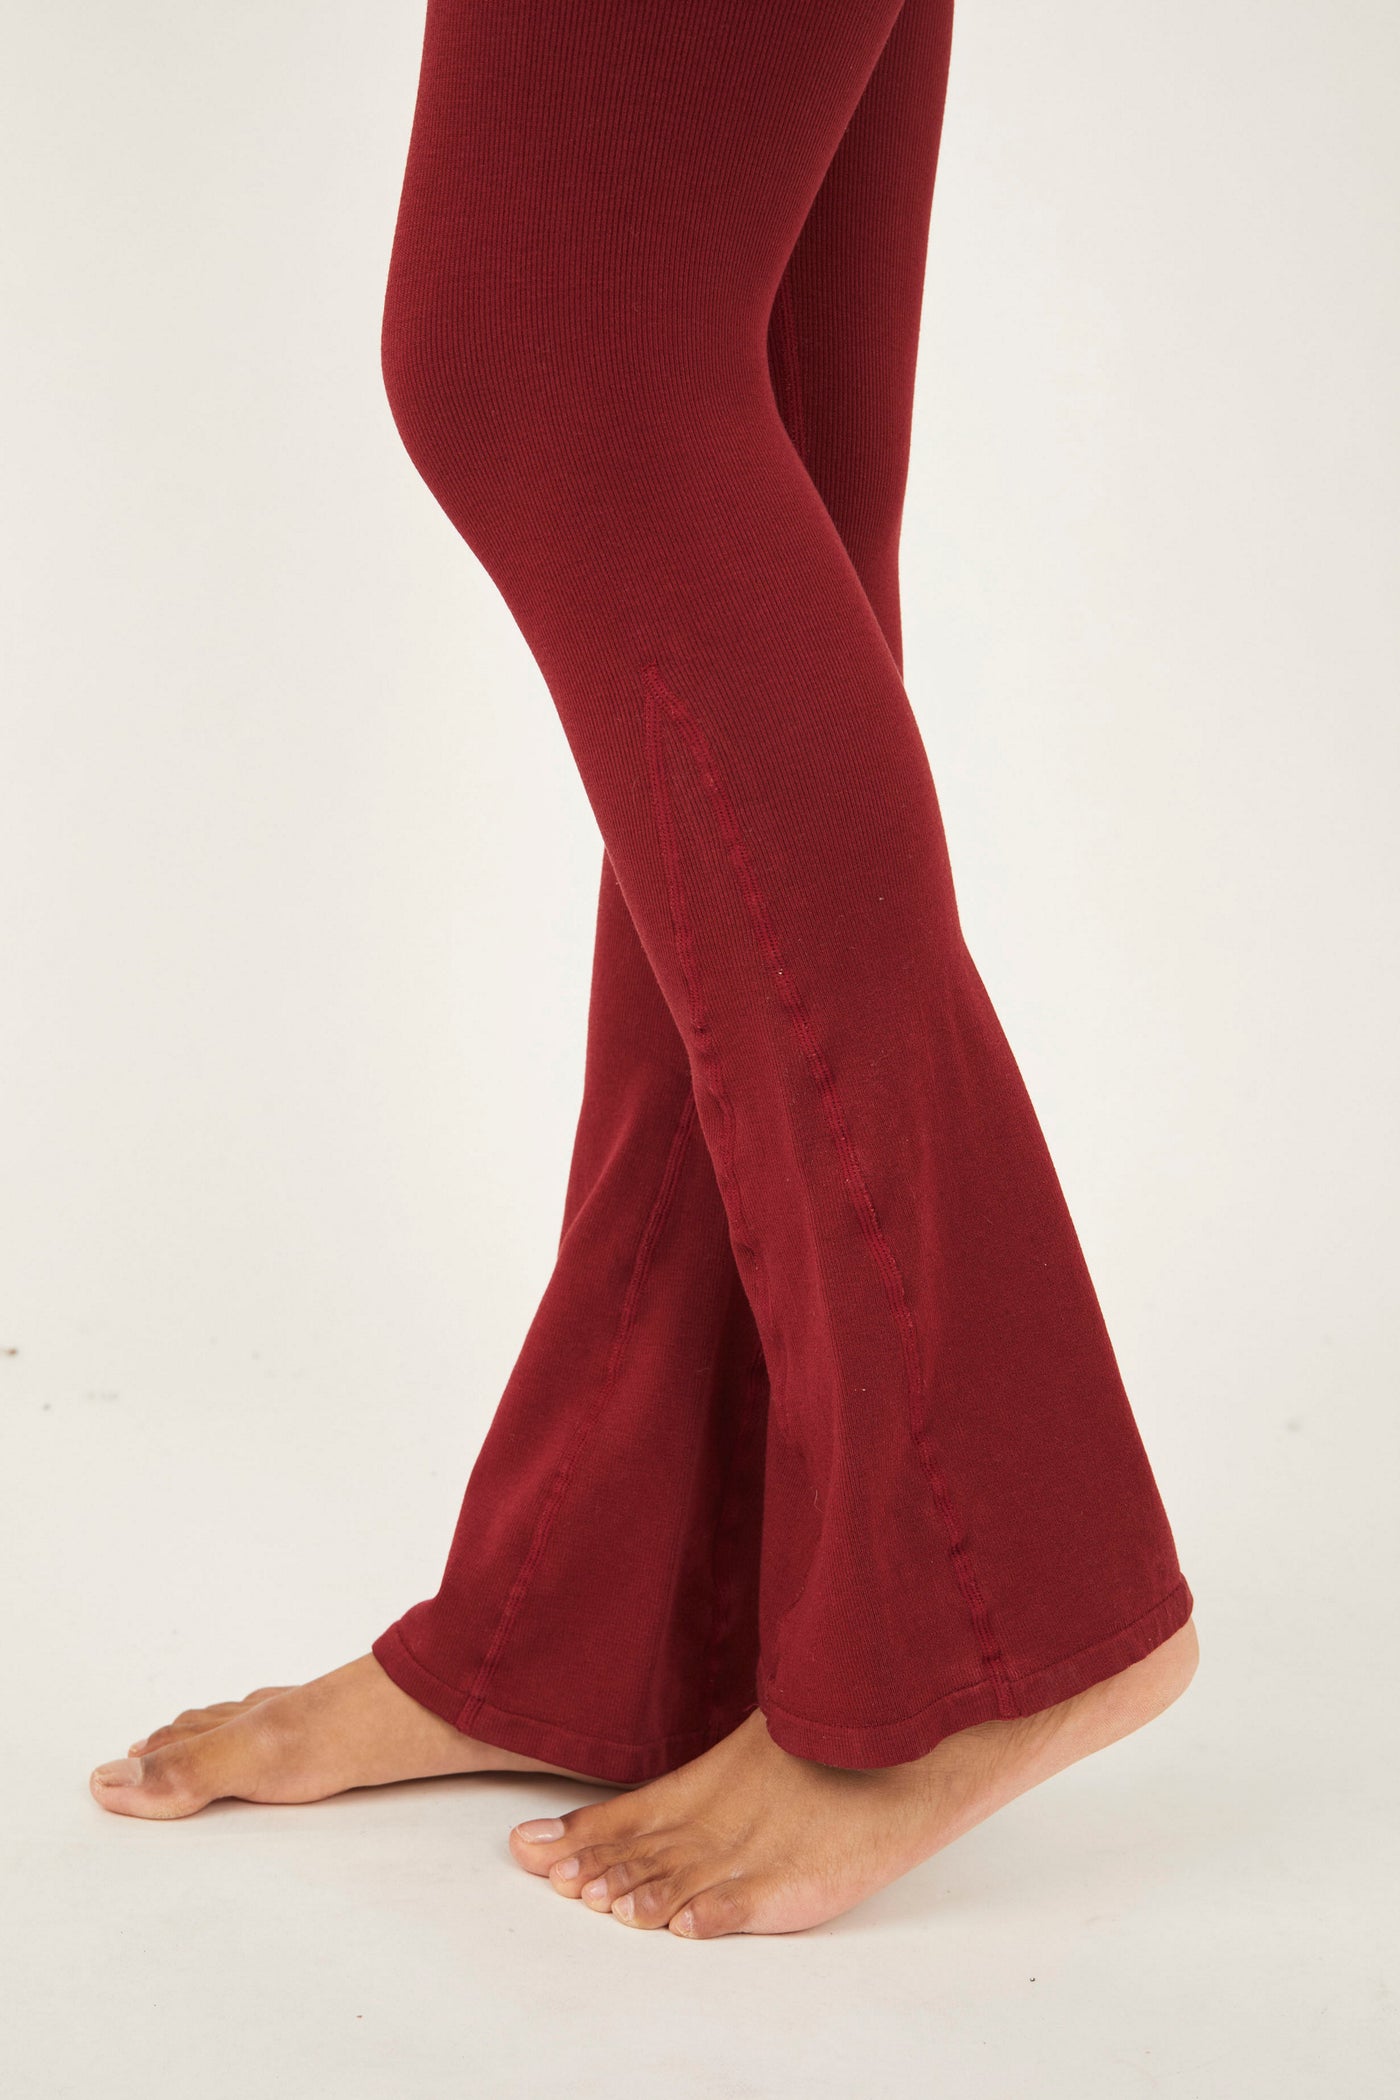 new FREE PEOPLE women pants OB1220672 6600 red flame sz XS $128